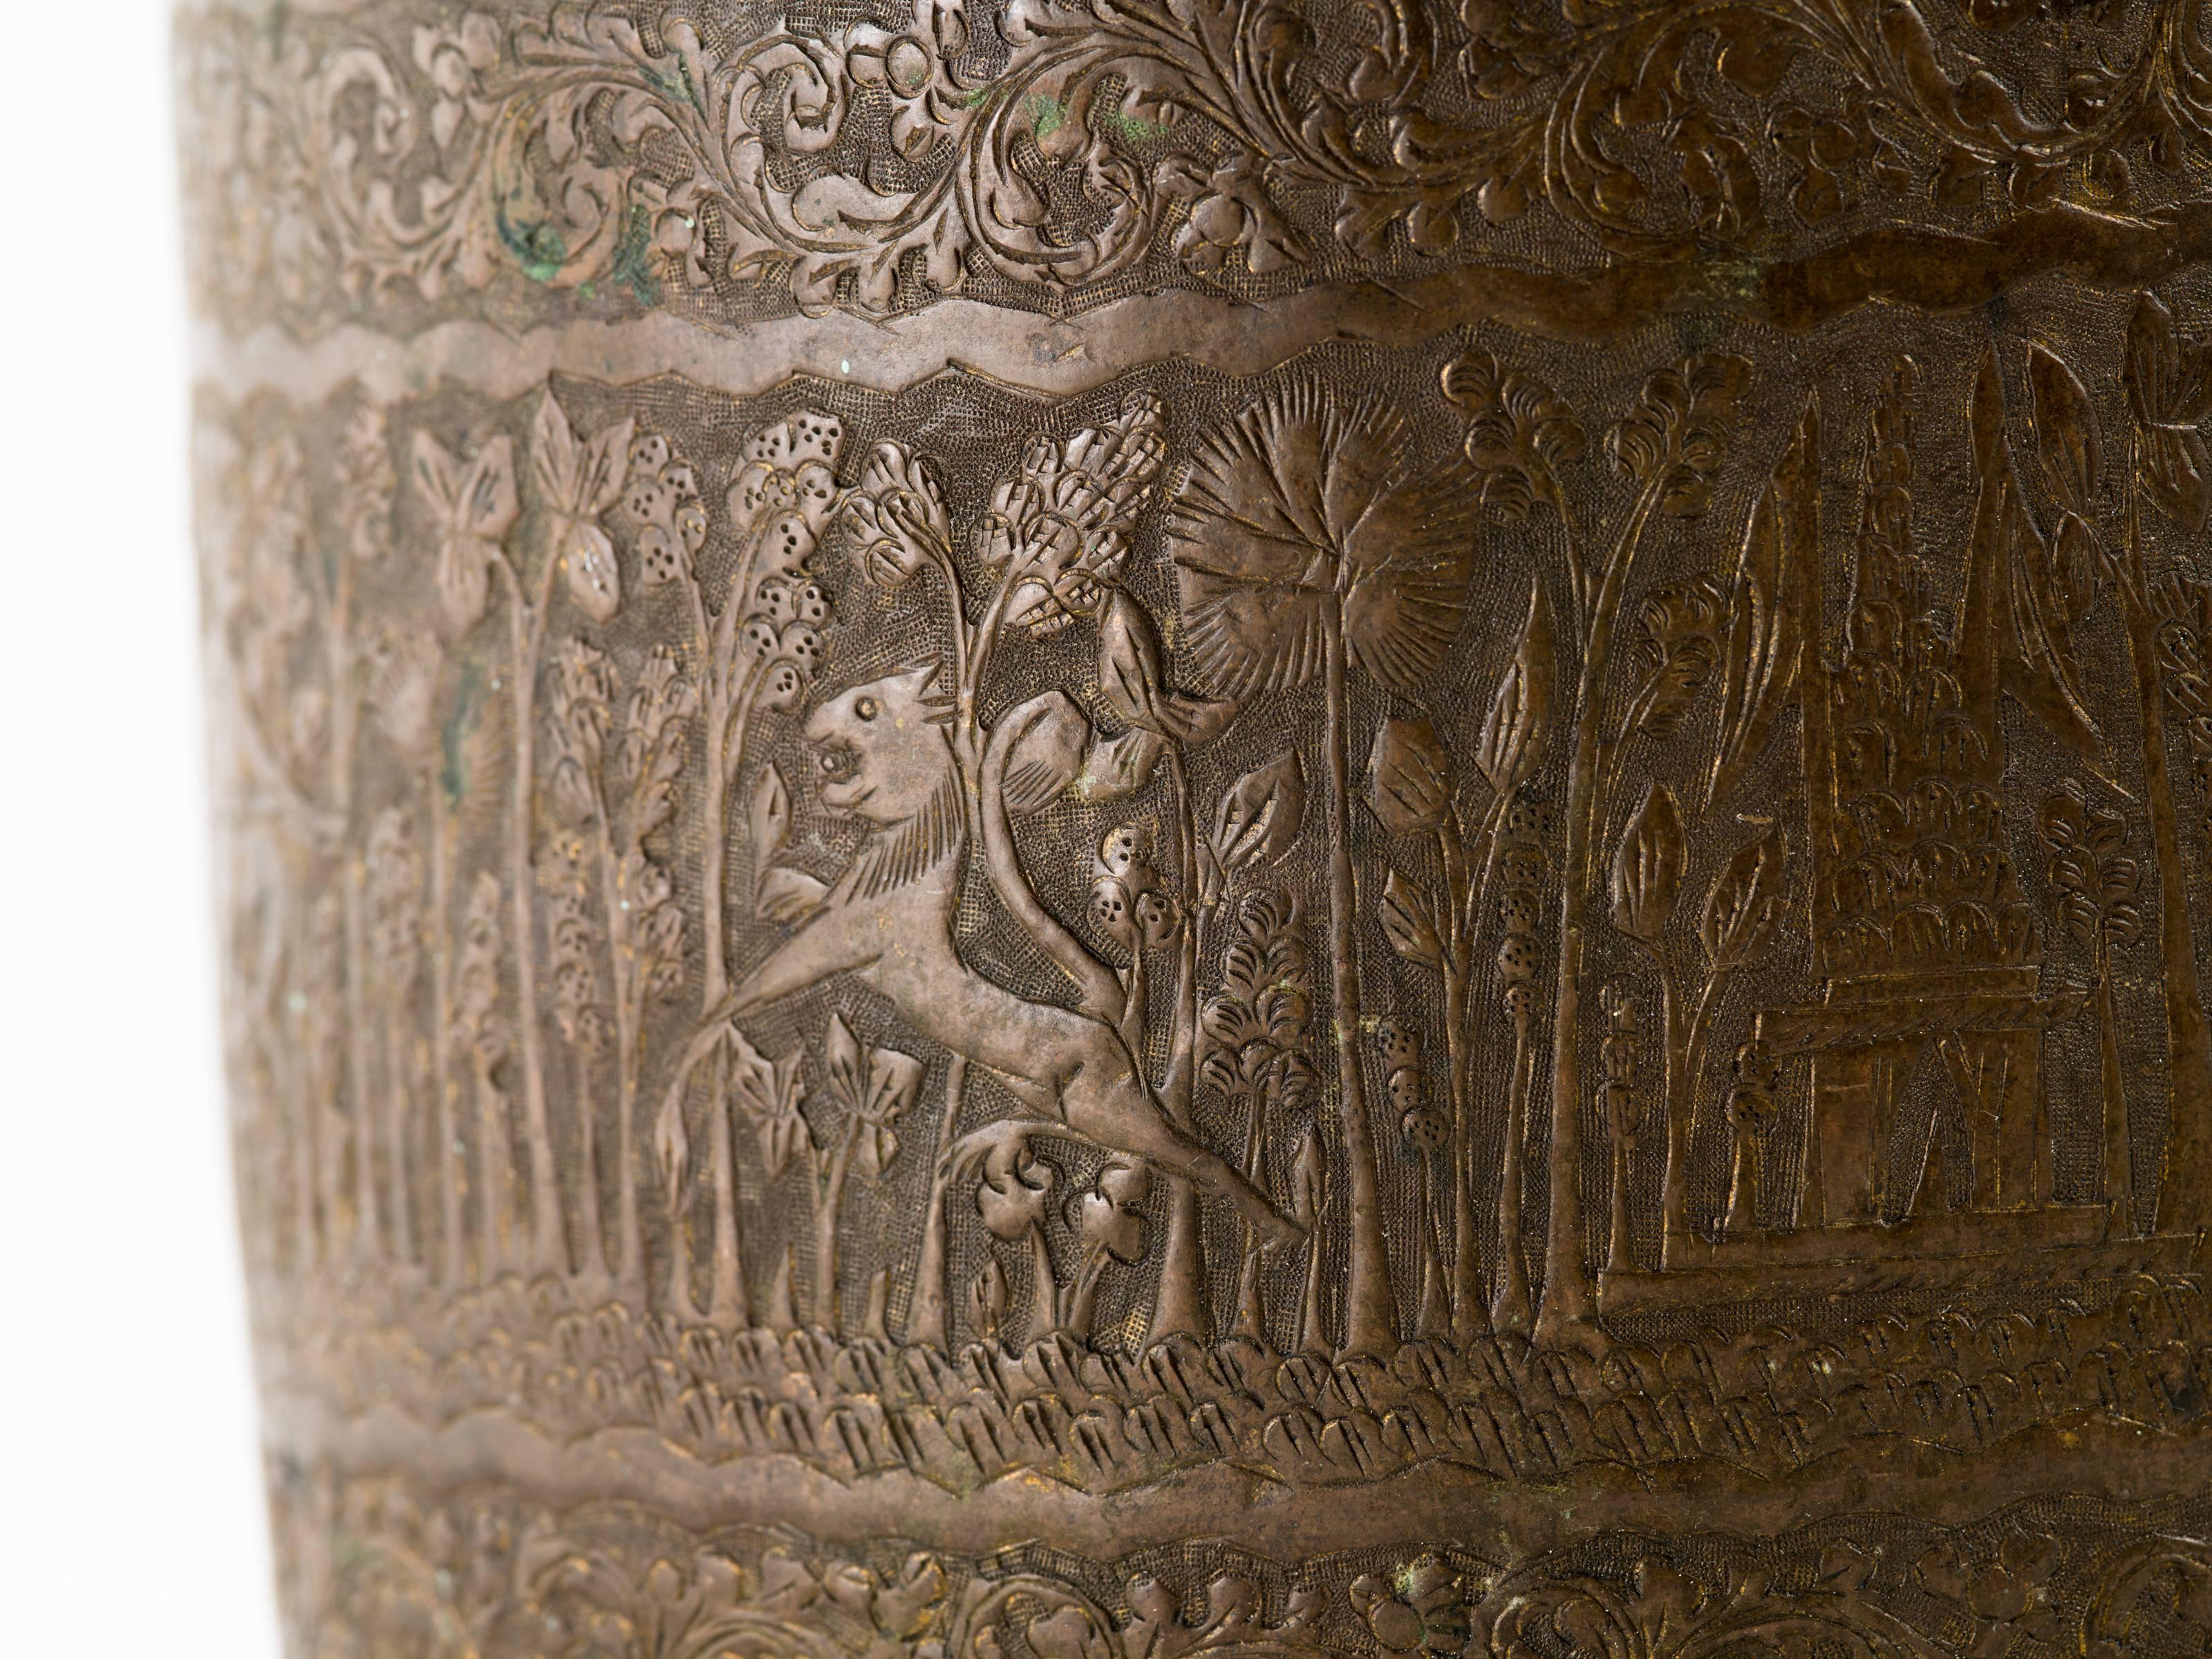 Antique Indian engraved brass vessel jardinière. Engraving is finely detailed depicting a Maharaja on a hunt through the forest on outside of entire vessel.